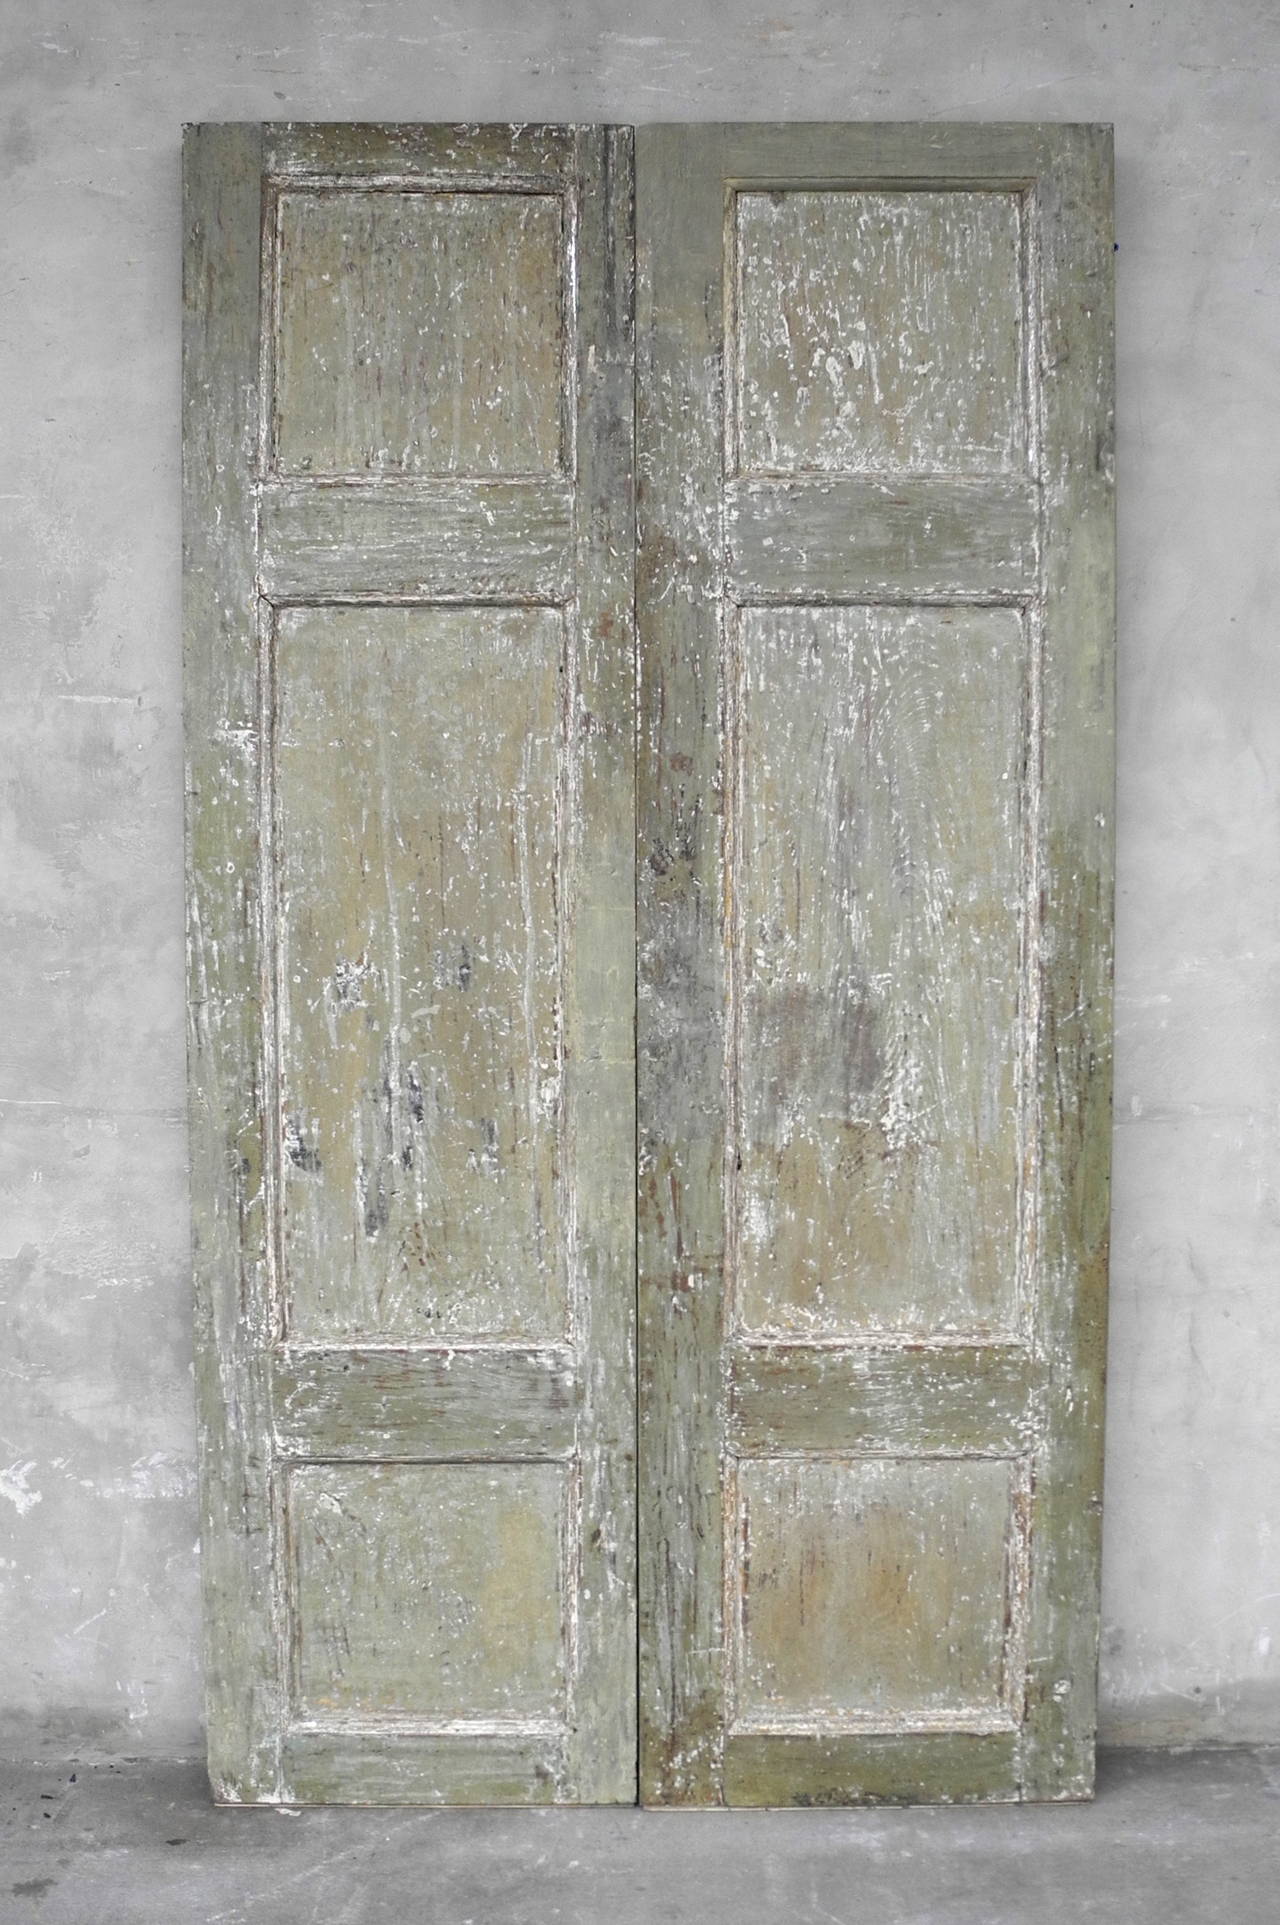 This pair of 18th century Italian doors were originally from Naples, Italy. Their rich green and gold patina would make these a stunning addition to any residence.